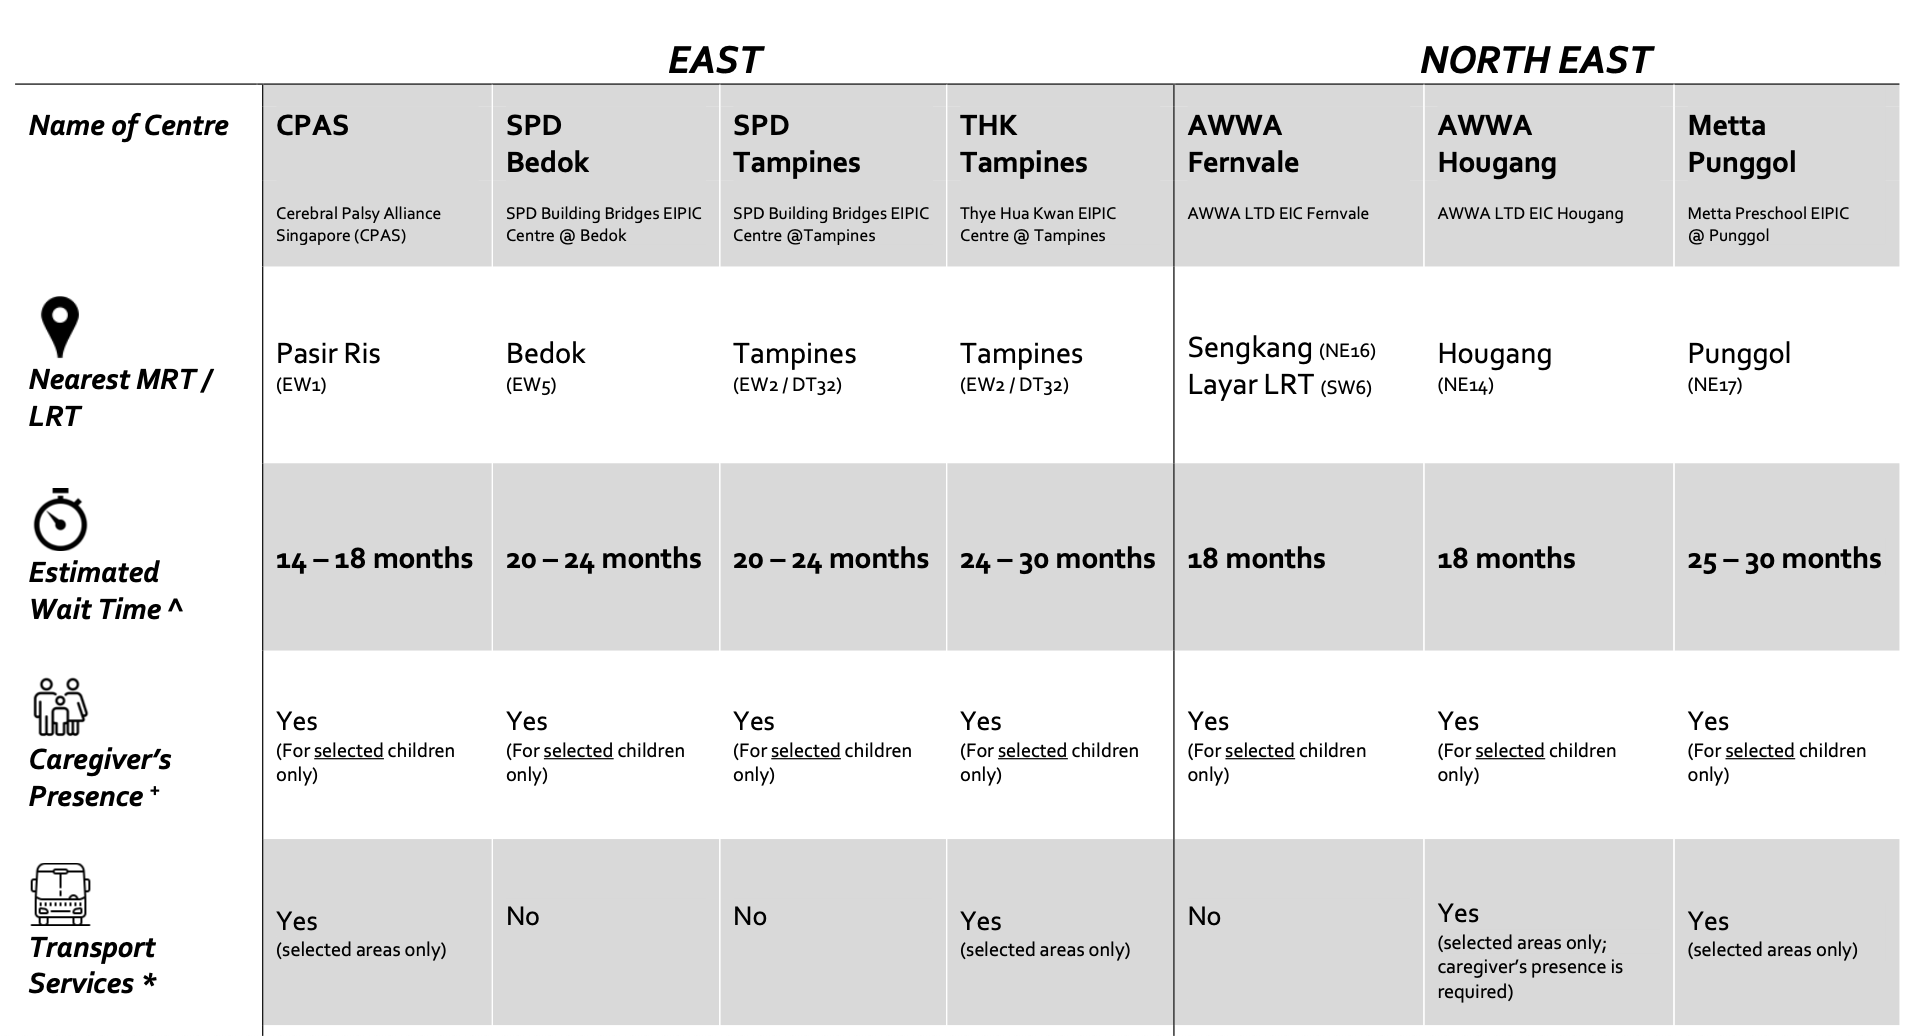 List of EIPIC centres in East and North East of Singapore (Credit: SG Enable)